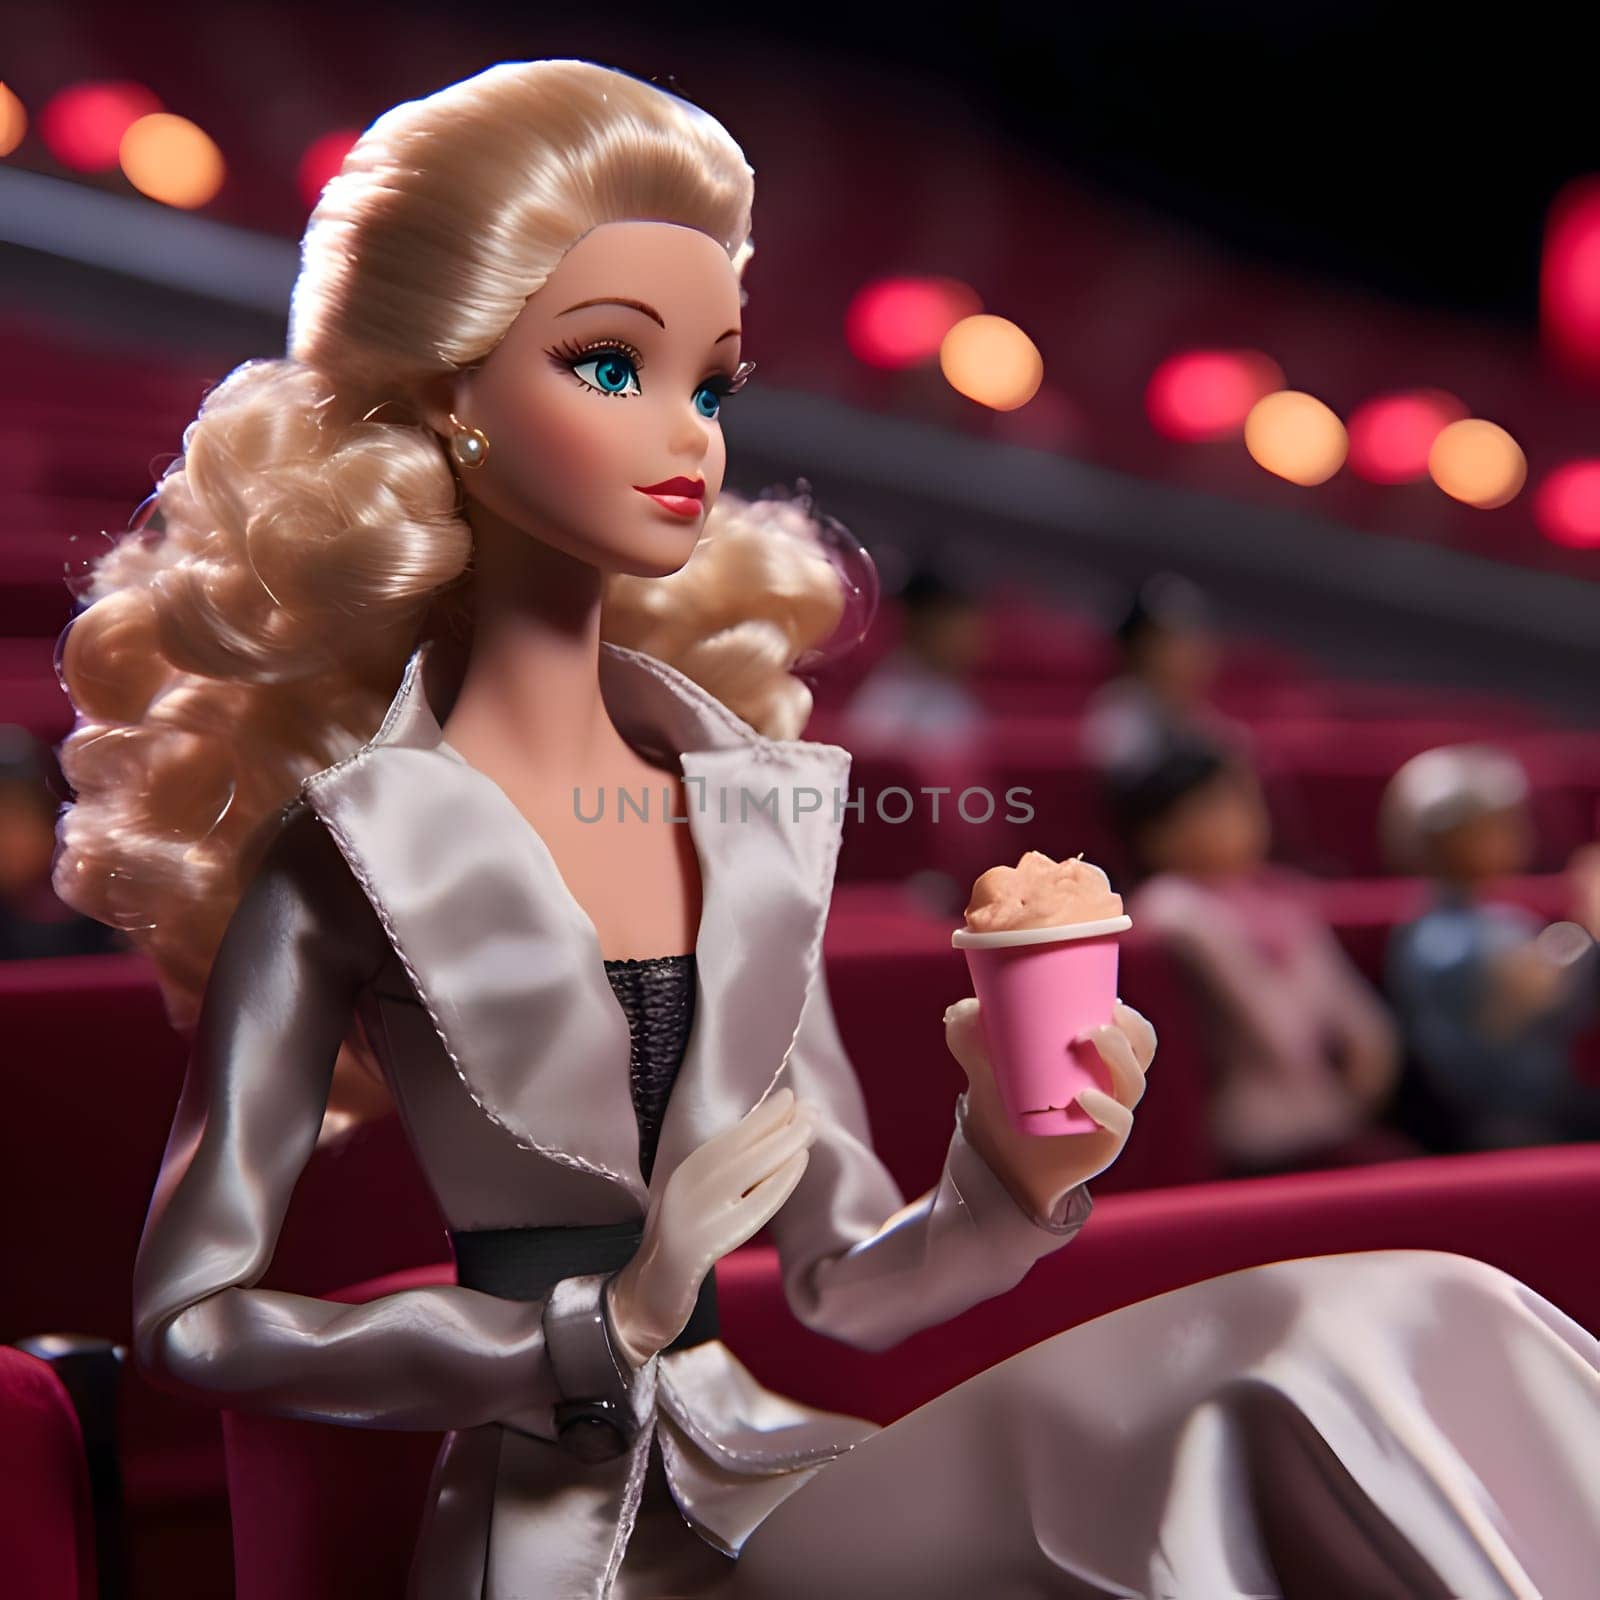 Adorable blonde Barbie sits in the movie theater, dressed in grey clothes, holding a bucket of popcorn. The background is blurred, focusing on her enjoyment of the movie.